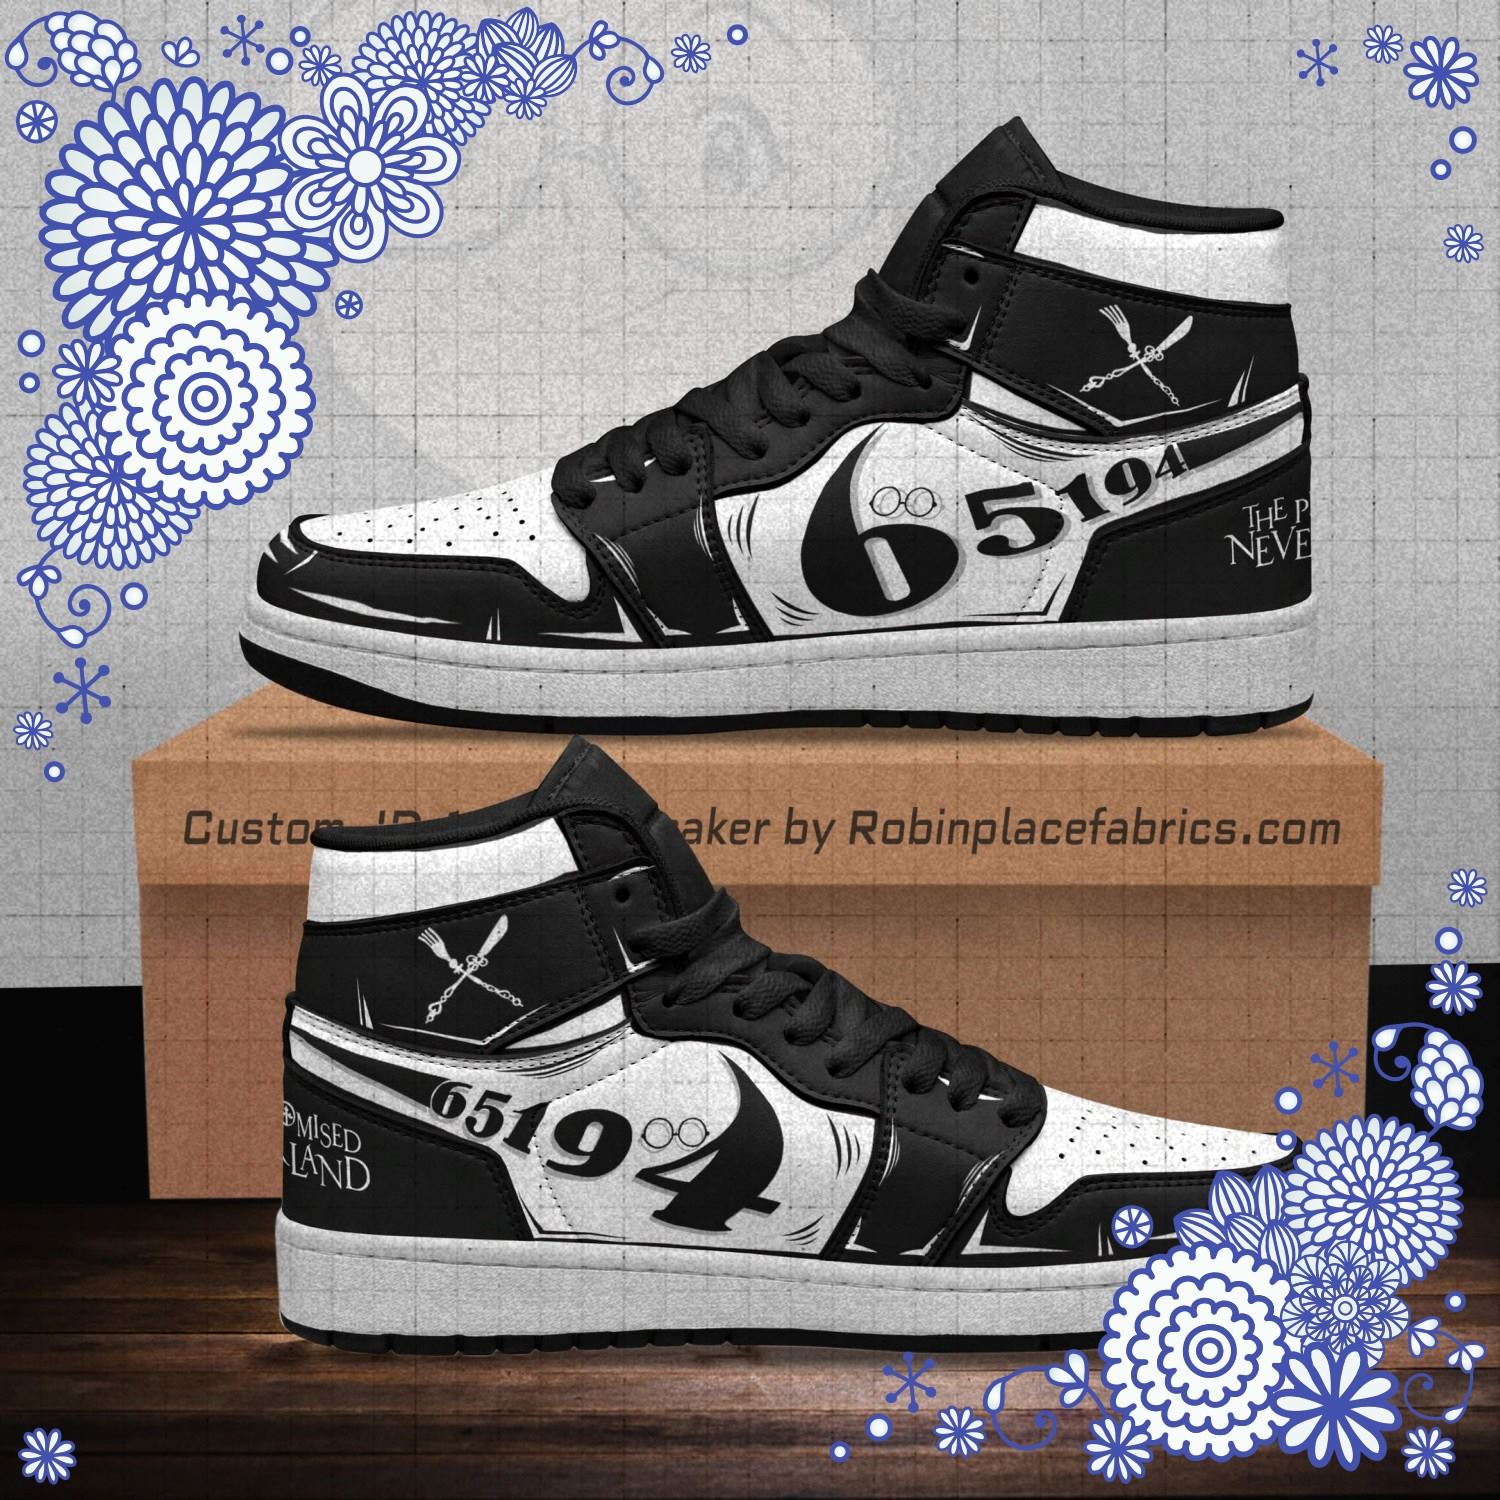 Gilda Boot Sneakers Custom The Promised Neverland Anime Shoes ...